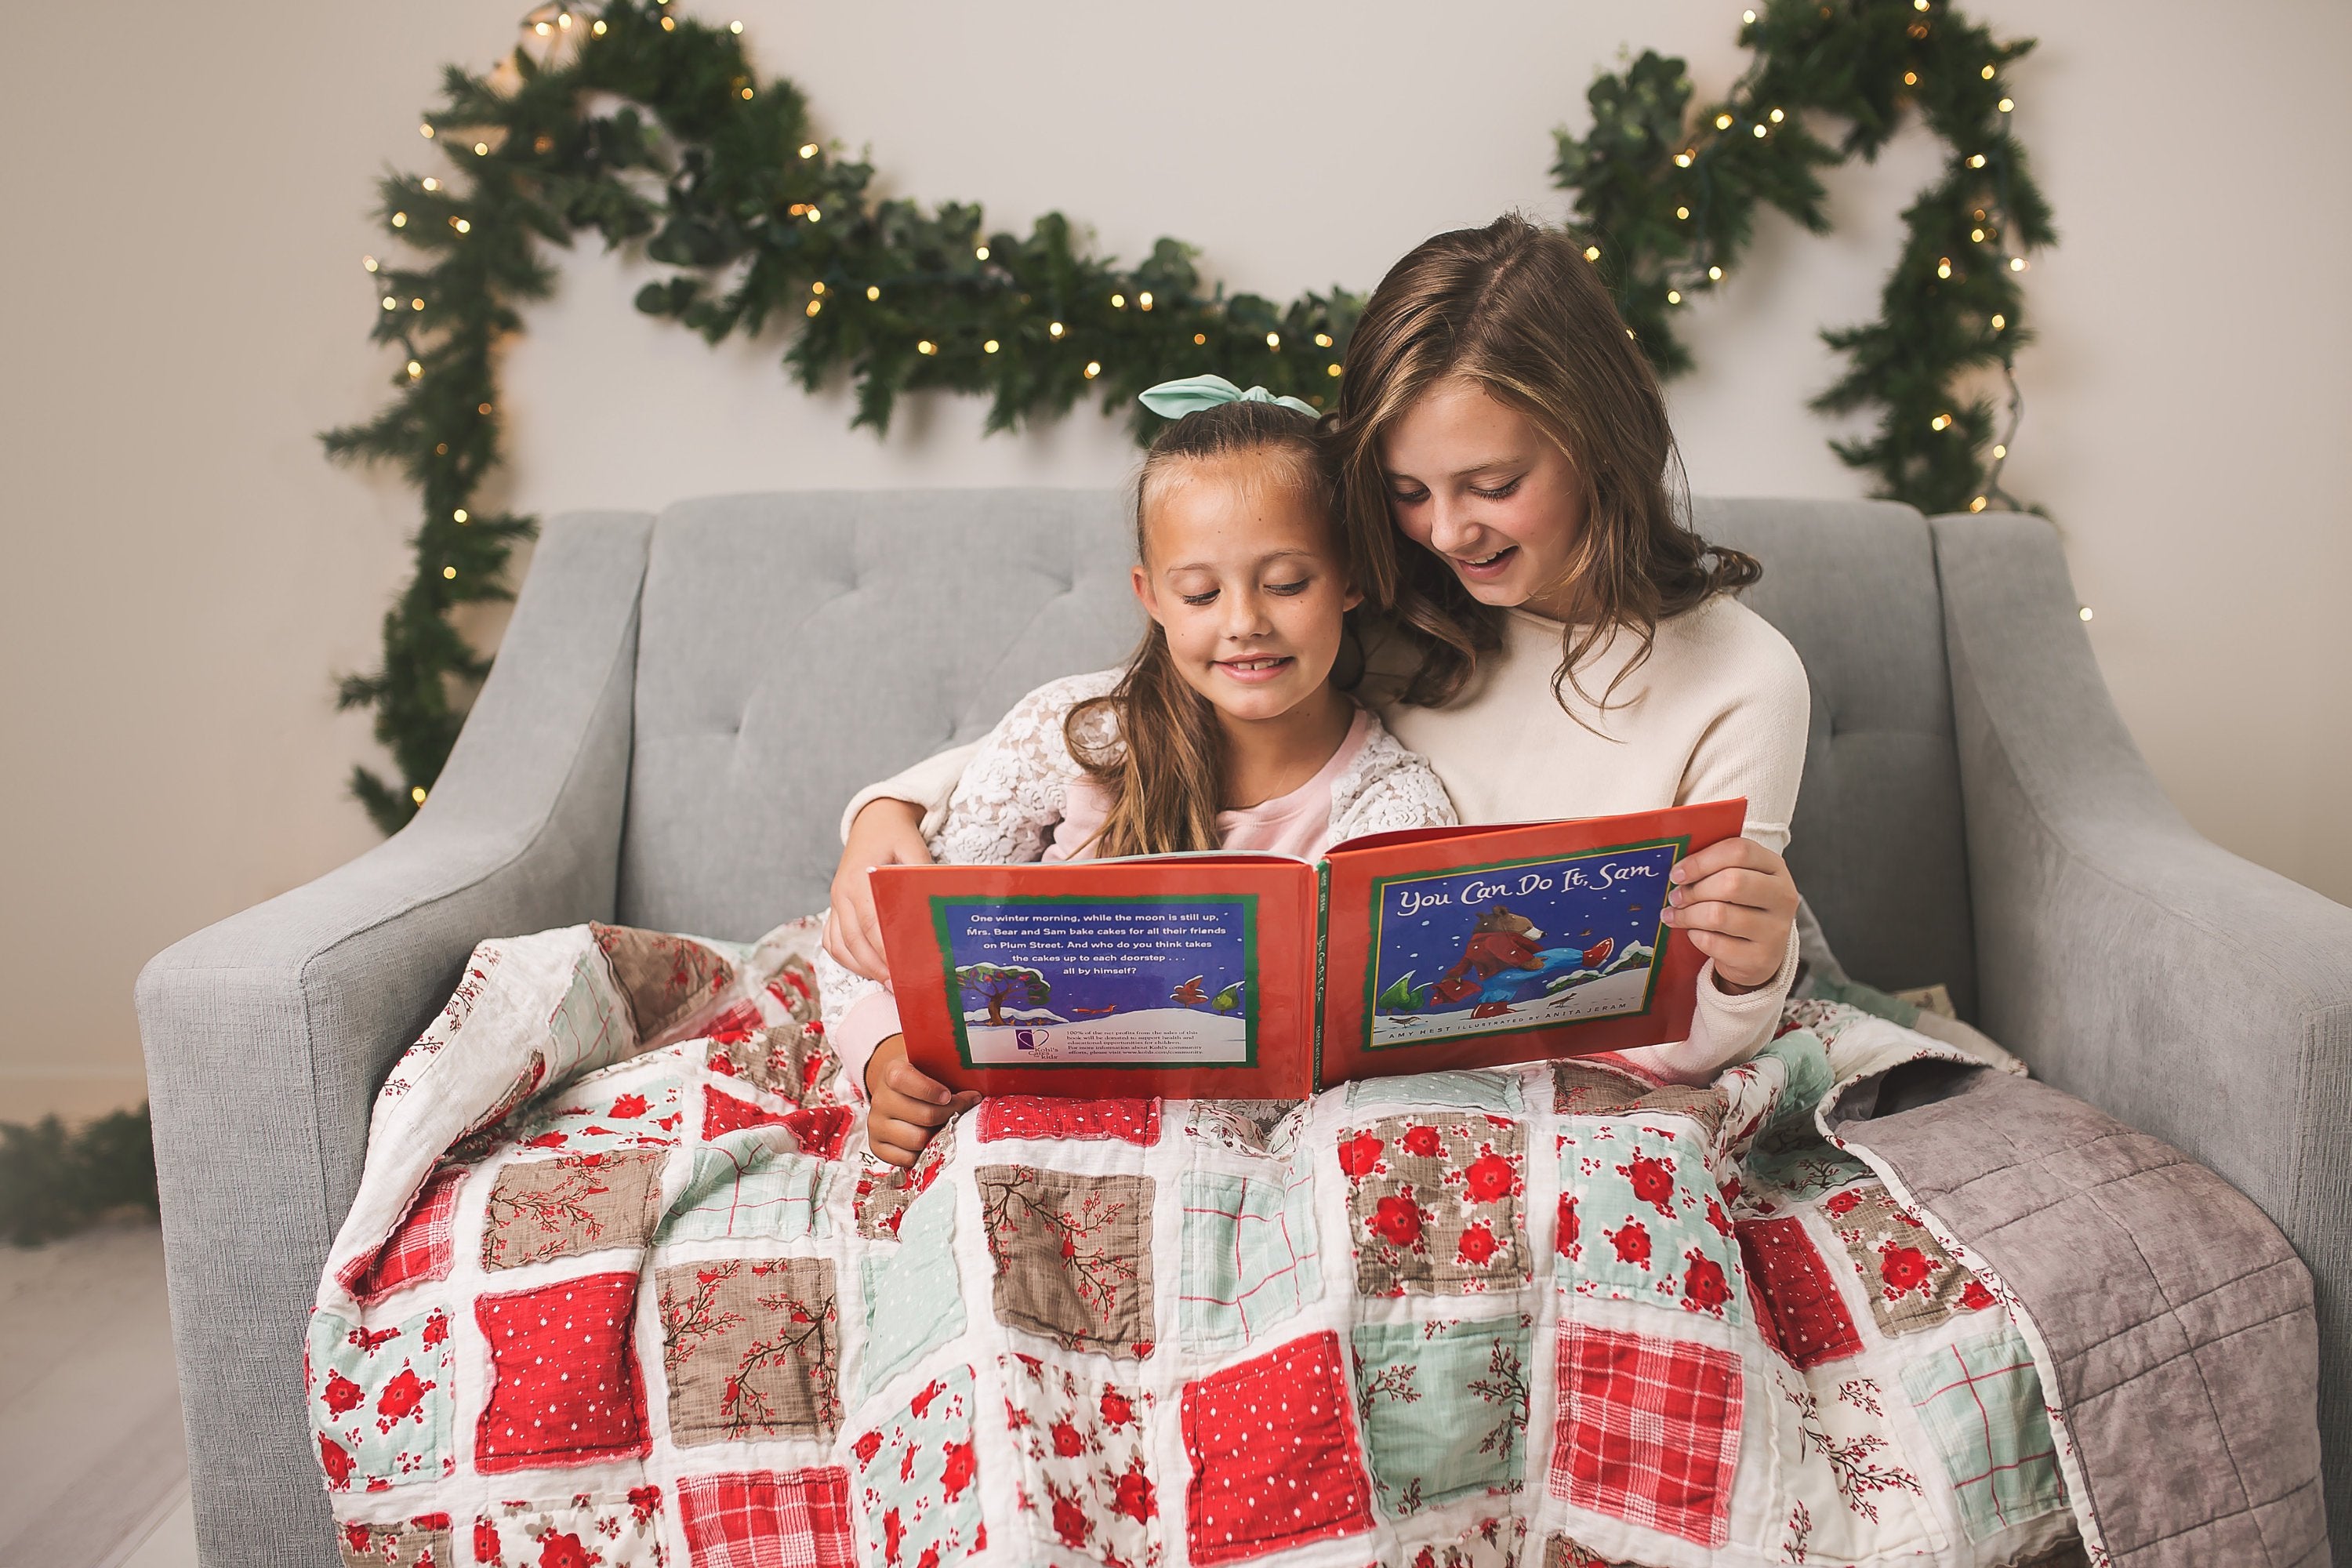 top-holiday-gifts-mother-daughter-yuletide-storytelling-snuggles-christmas-decor-matching-pjs